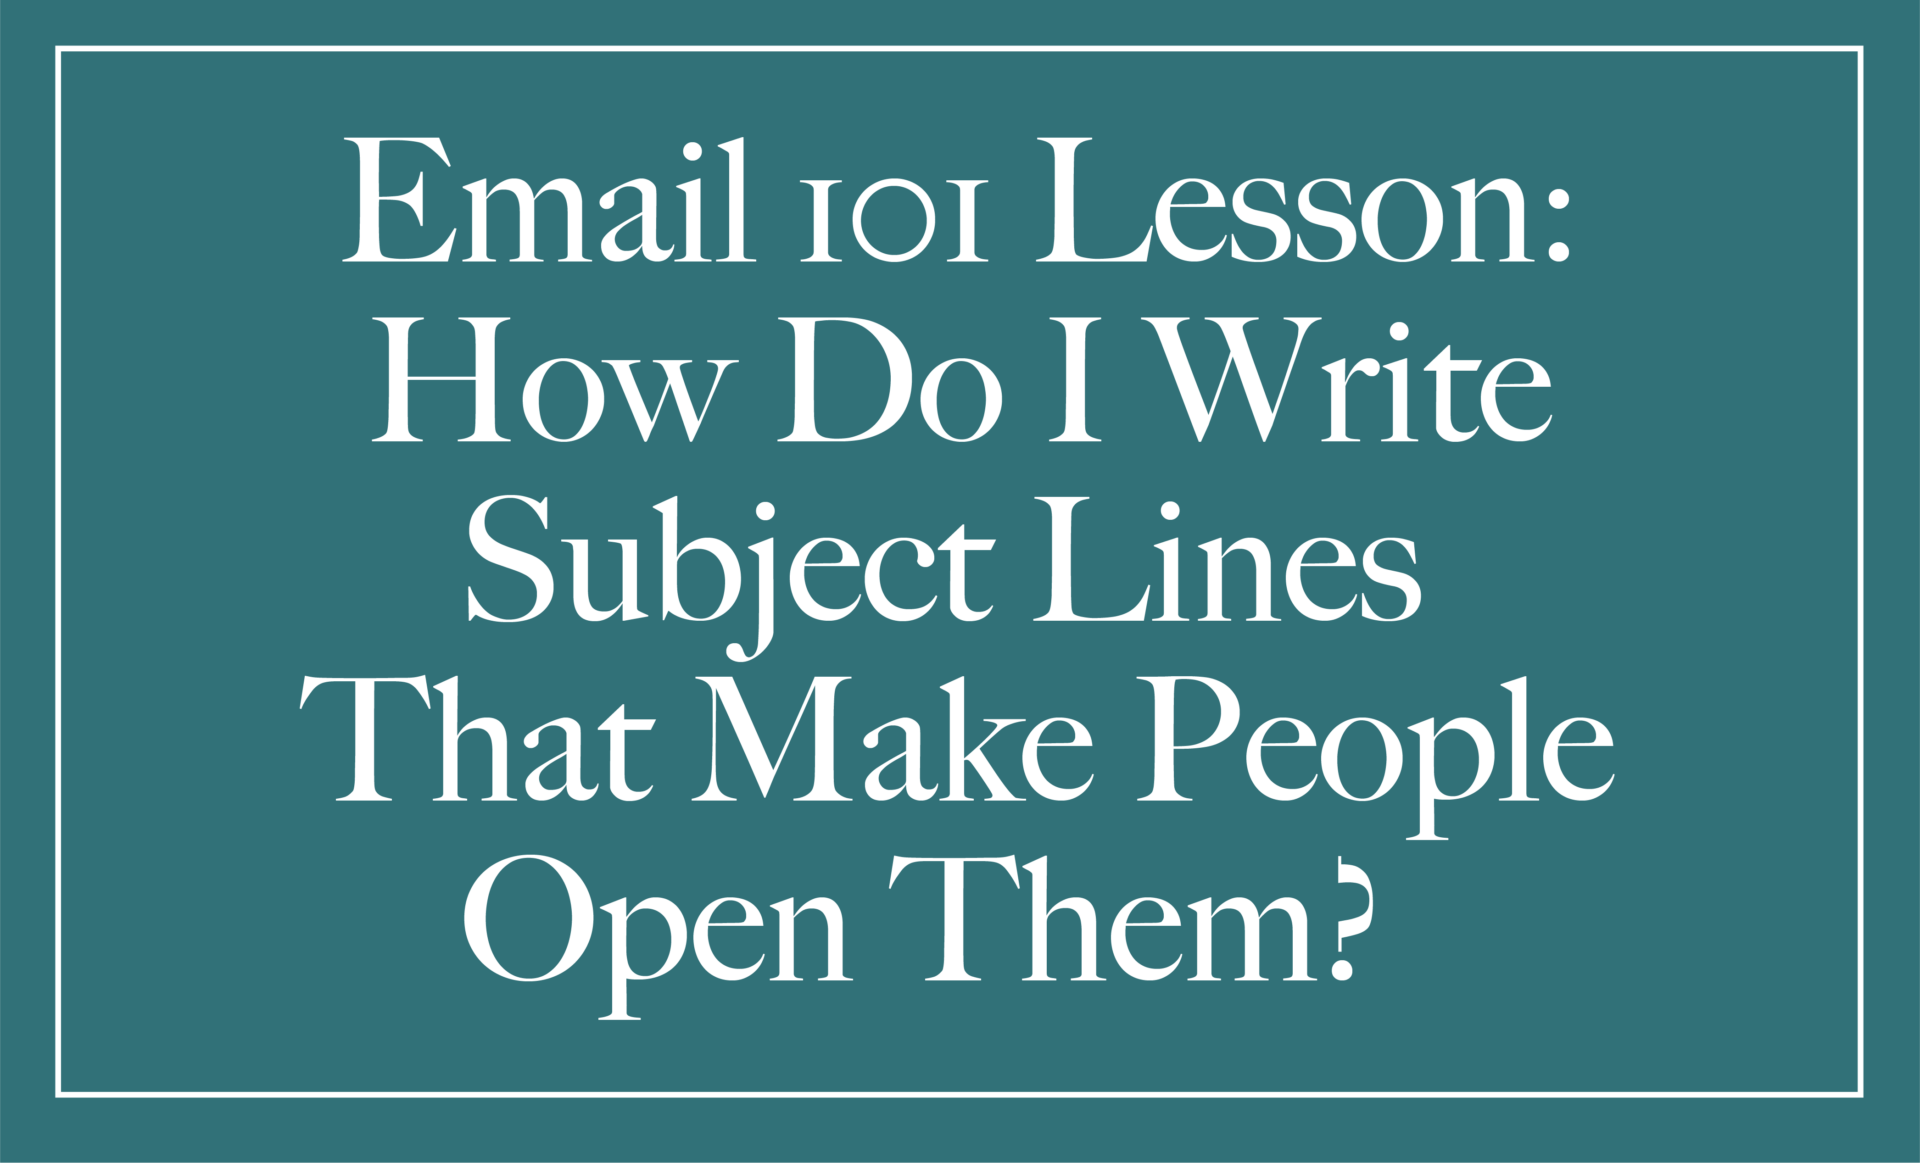 A green background that says "Email 101 Lesson: How do I write email subject lines that make people open them?"